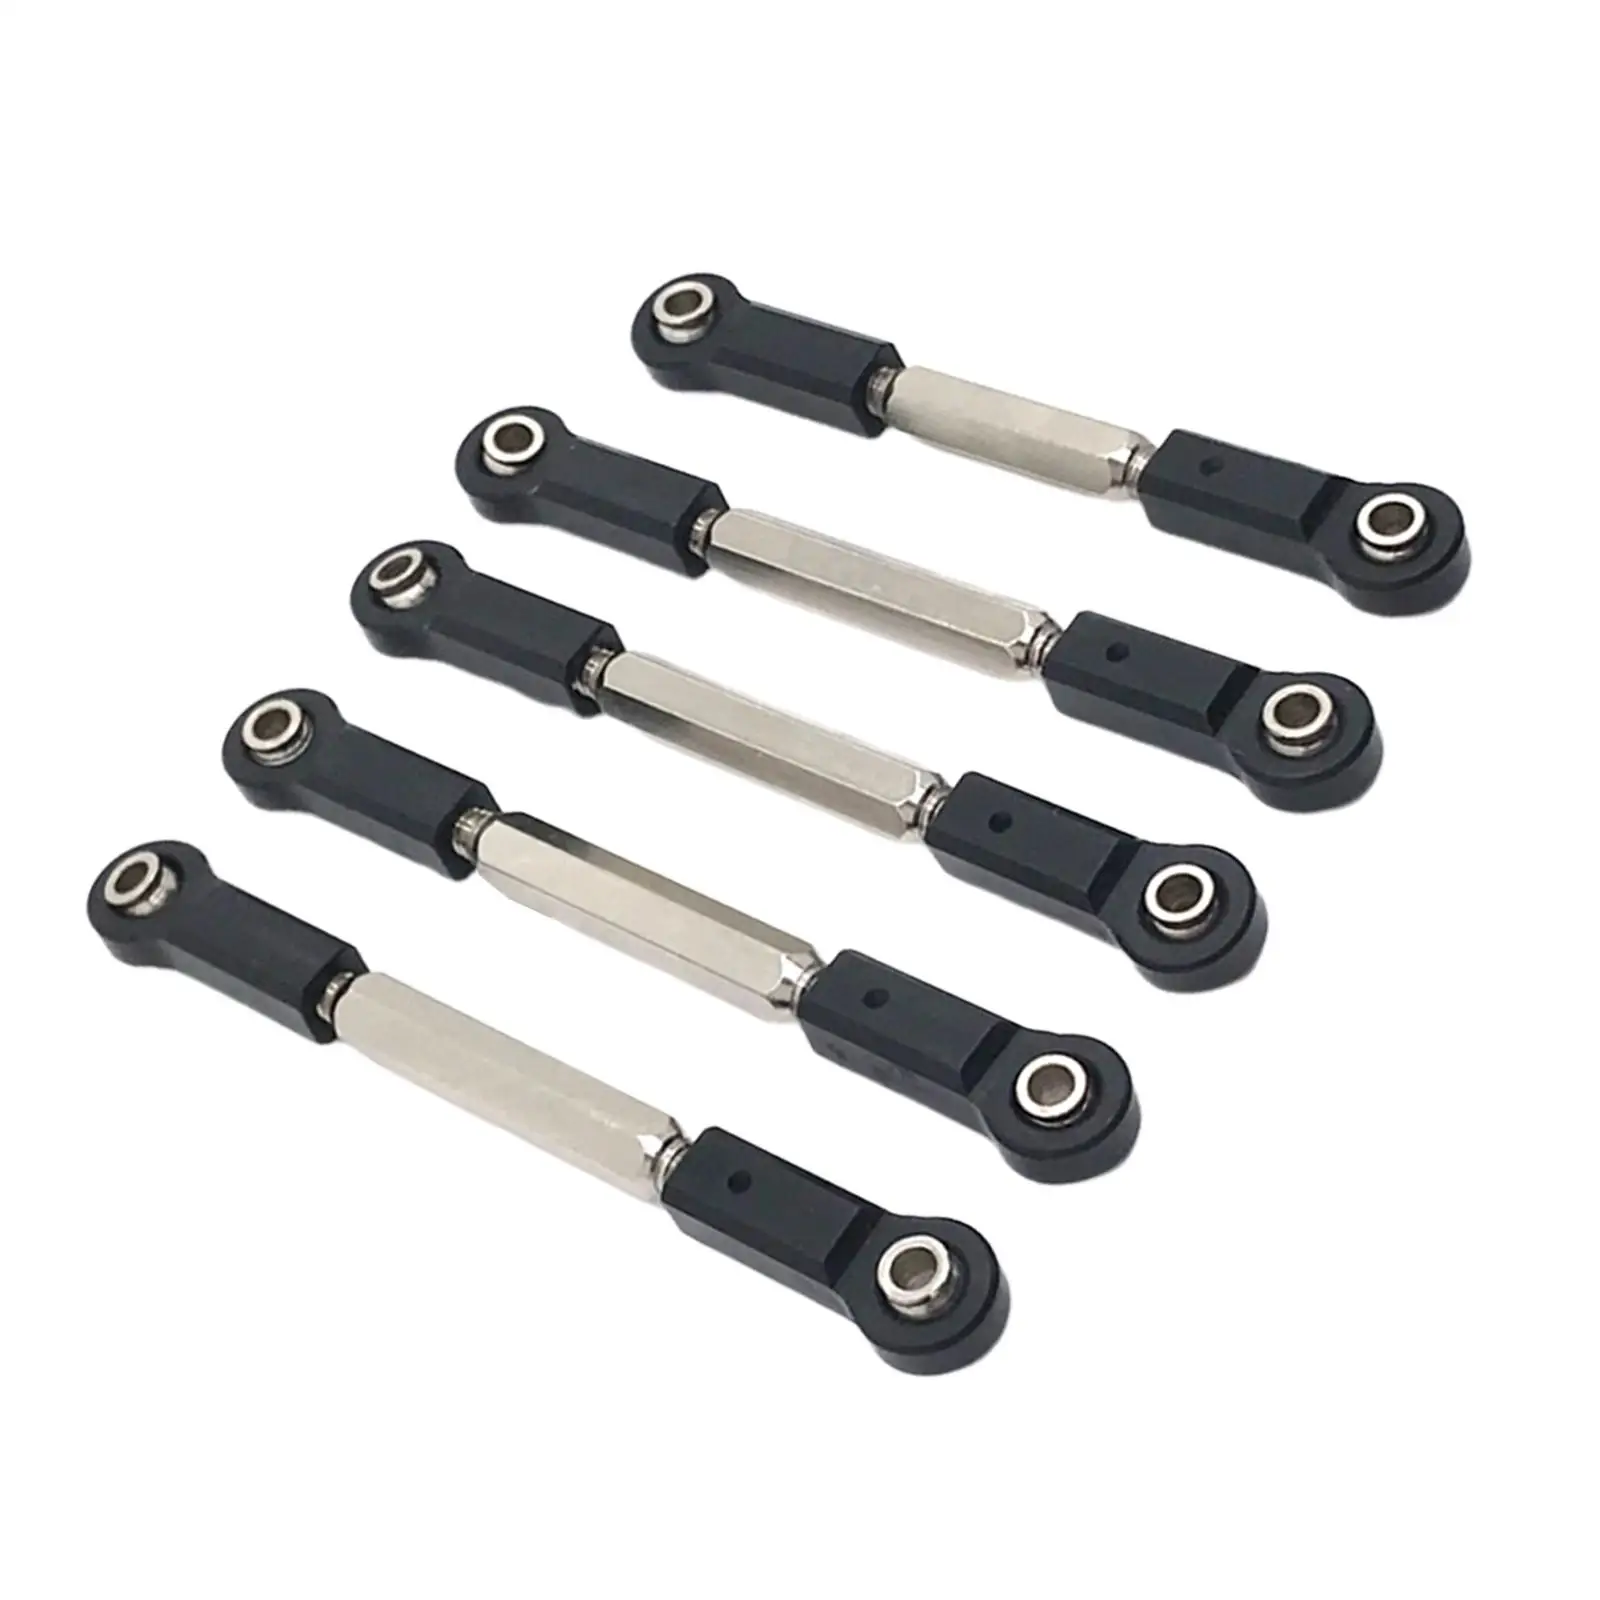 5x 1:10 Scale Steering Link Rod Adjustable Replacement Accessory Steering Rod for JLB J3 RC Crawler Accessory Parts Upgrade